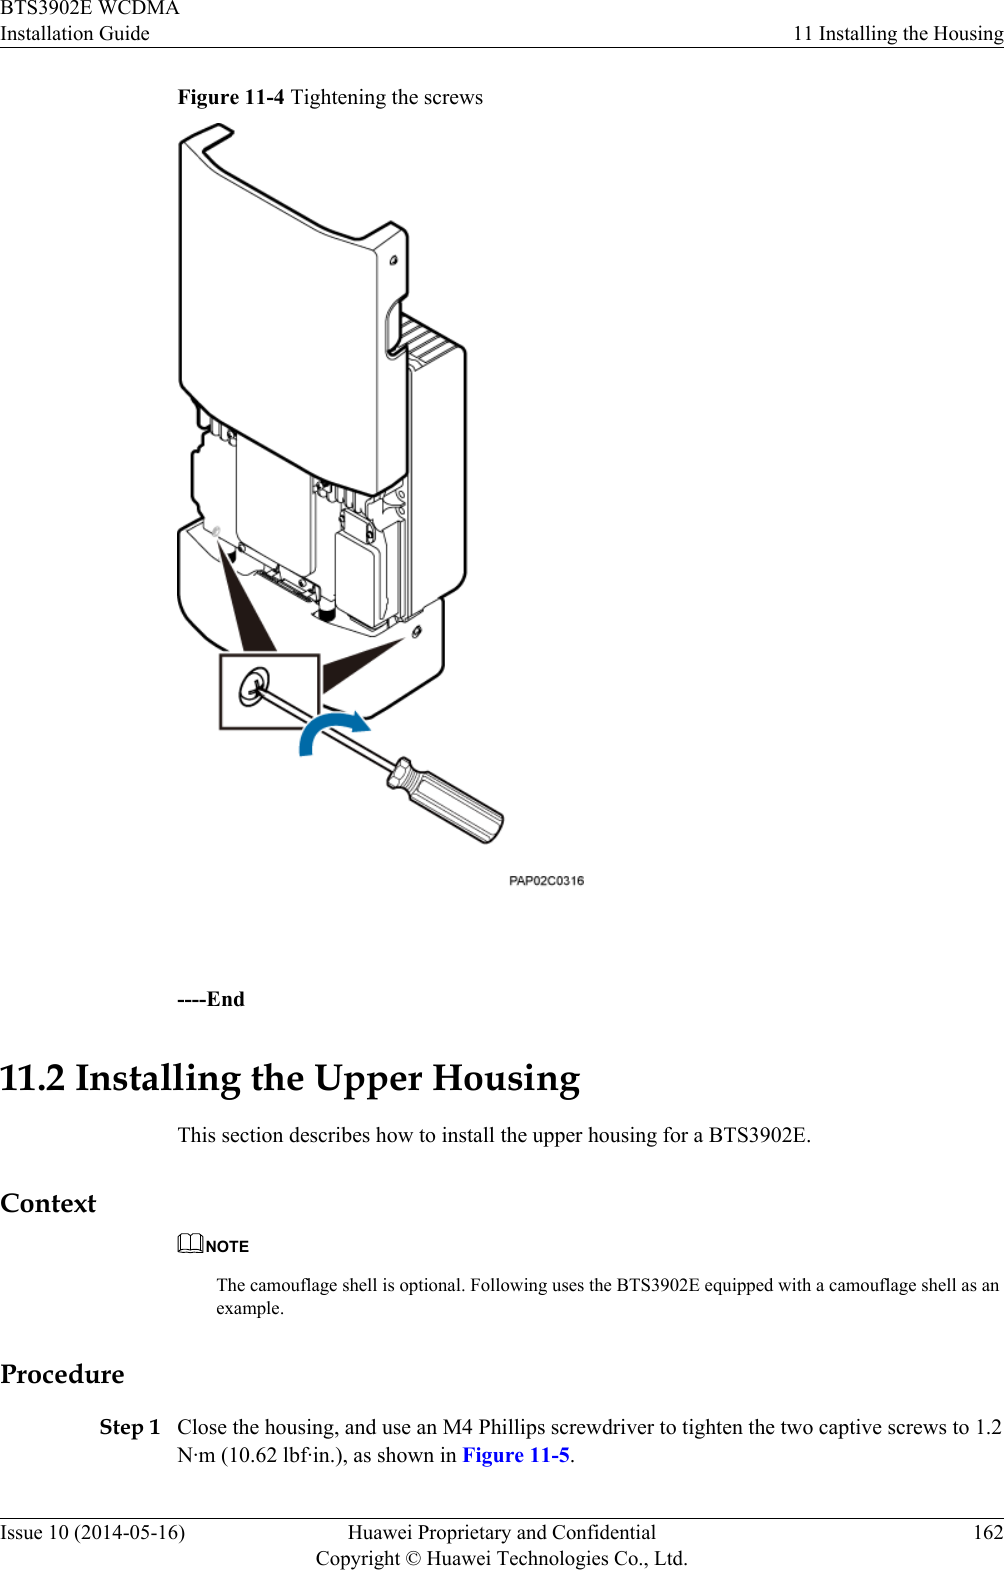 Figure 11-4 Tightening the screws ----End11.2 Installing the Upper HousingThis section describes how to install the upper housing for a BTS3902E.ContextNOTEThe camouflage shell is optional. Following uses the BTS3902E equipped with a camouflage shell as anexample.ProcedureStep 1 Close the housing, and use an M4 Phillips screwdriver to tighten the two captive screws to 1.2N·m (10.62 lbf·in.), as shown in Figure 11-5.BTS3902E WCDMAInstallation Guide 11 Installing the HousingIssue 10 (2014-05-16) Huawei Proprietary and ConfidentialCopyright © Huawei Technologies Co., Ltd.162